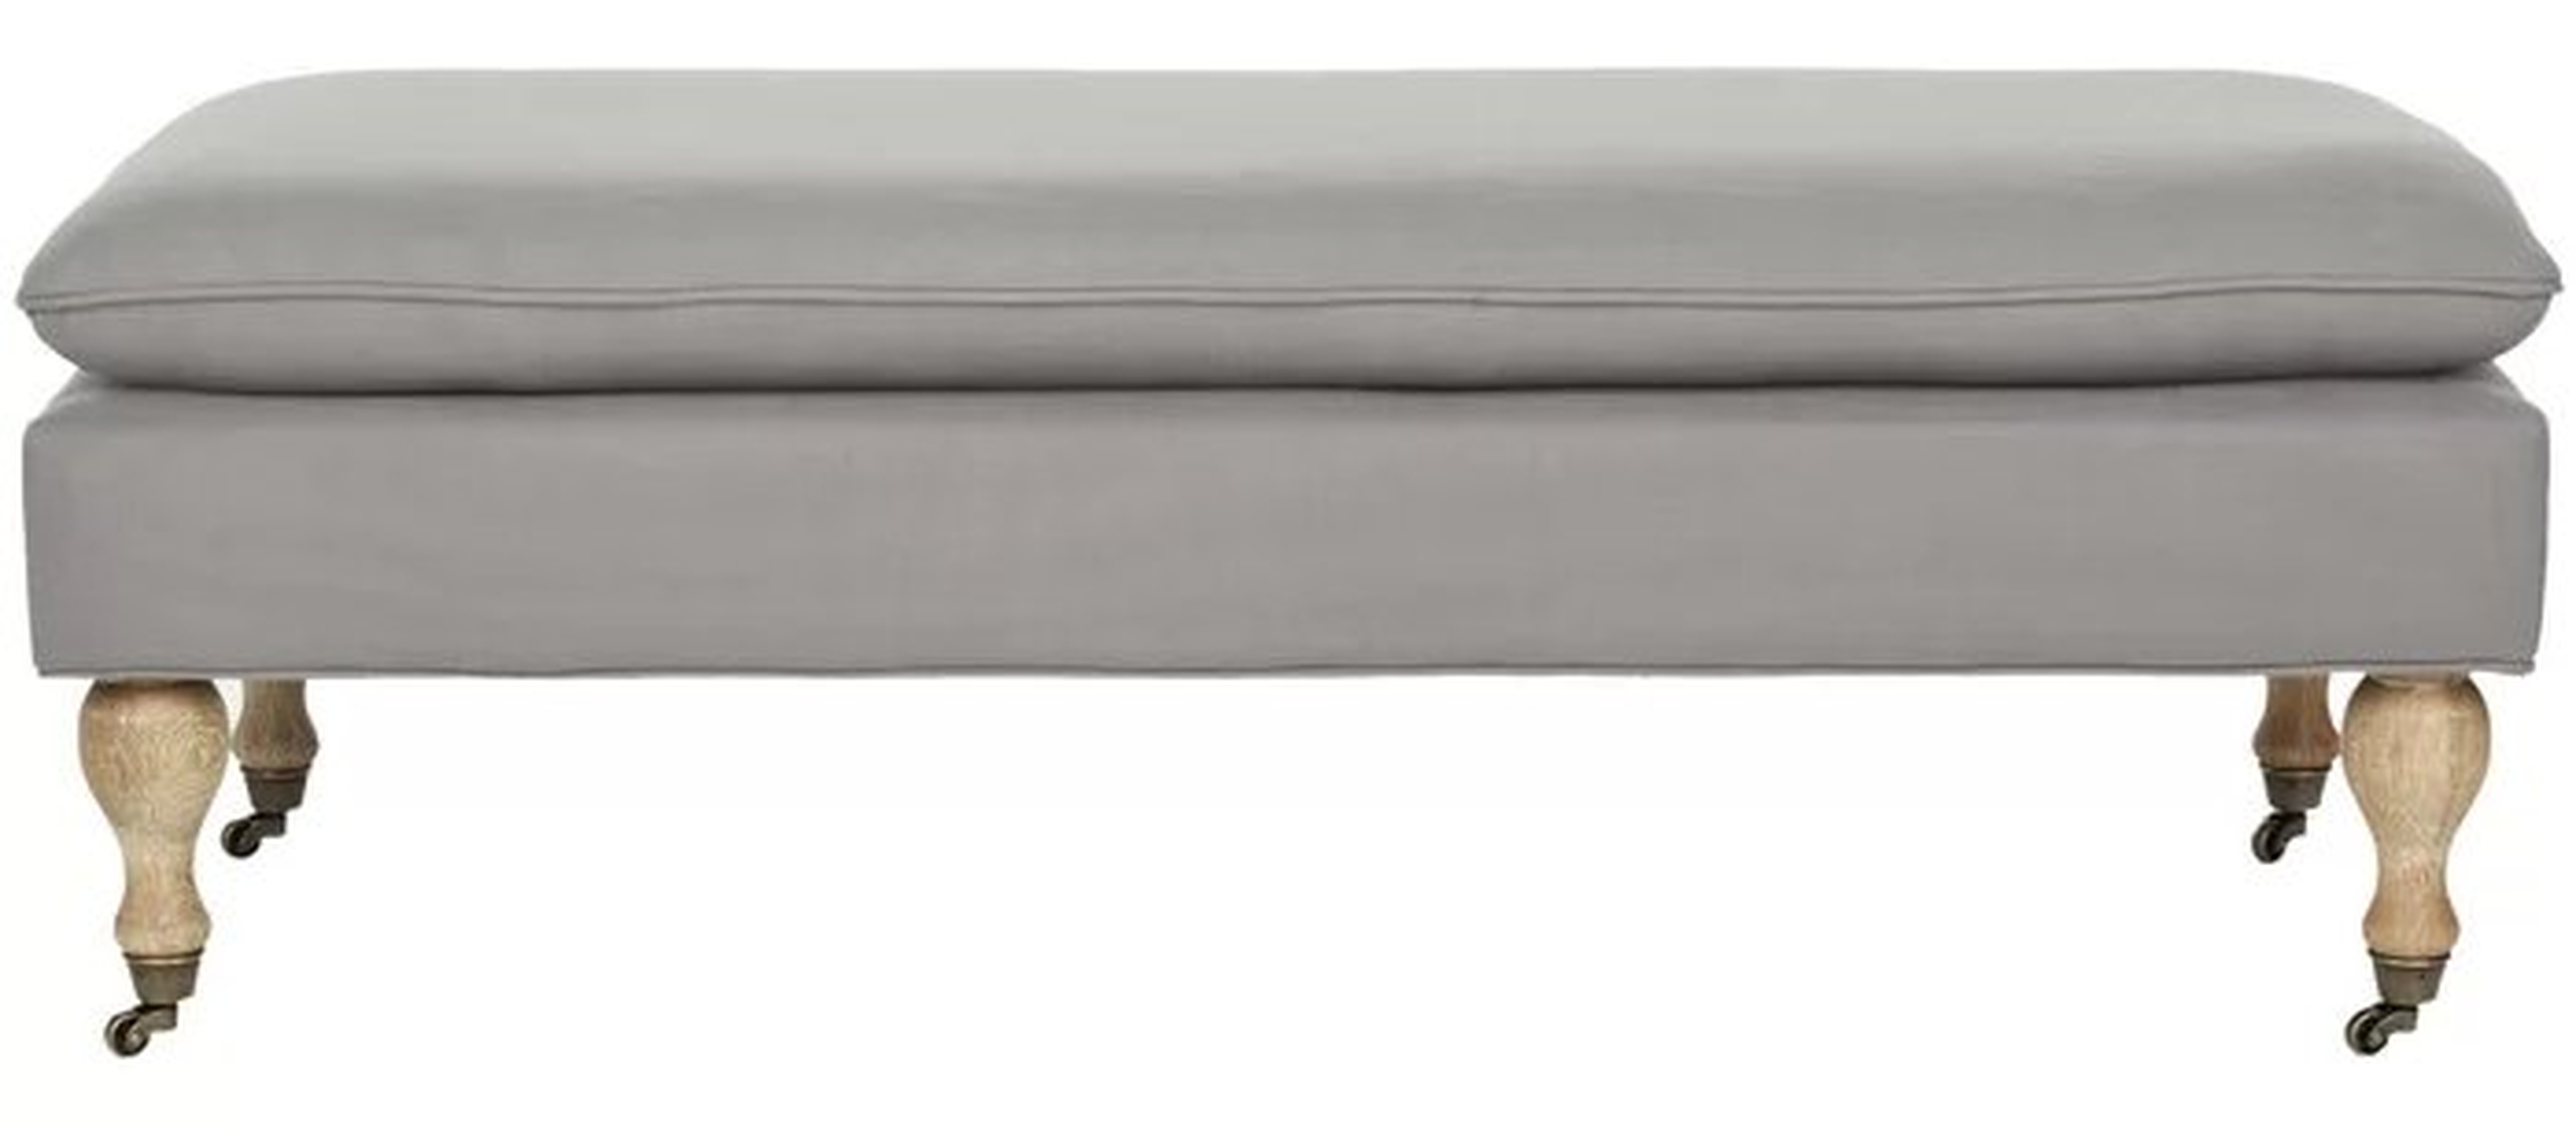 Mayotte Upholstered Bench - Wayfair